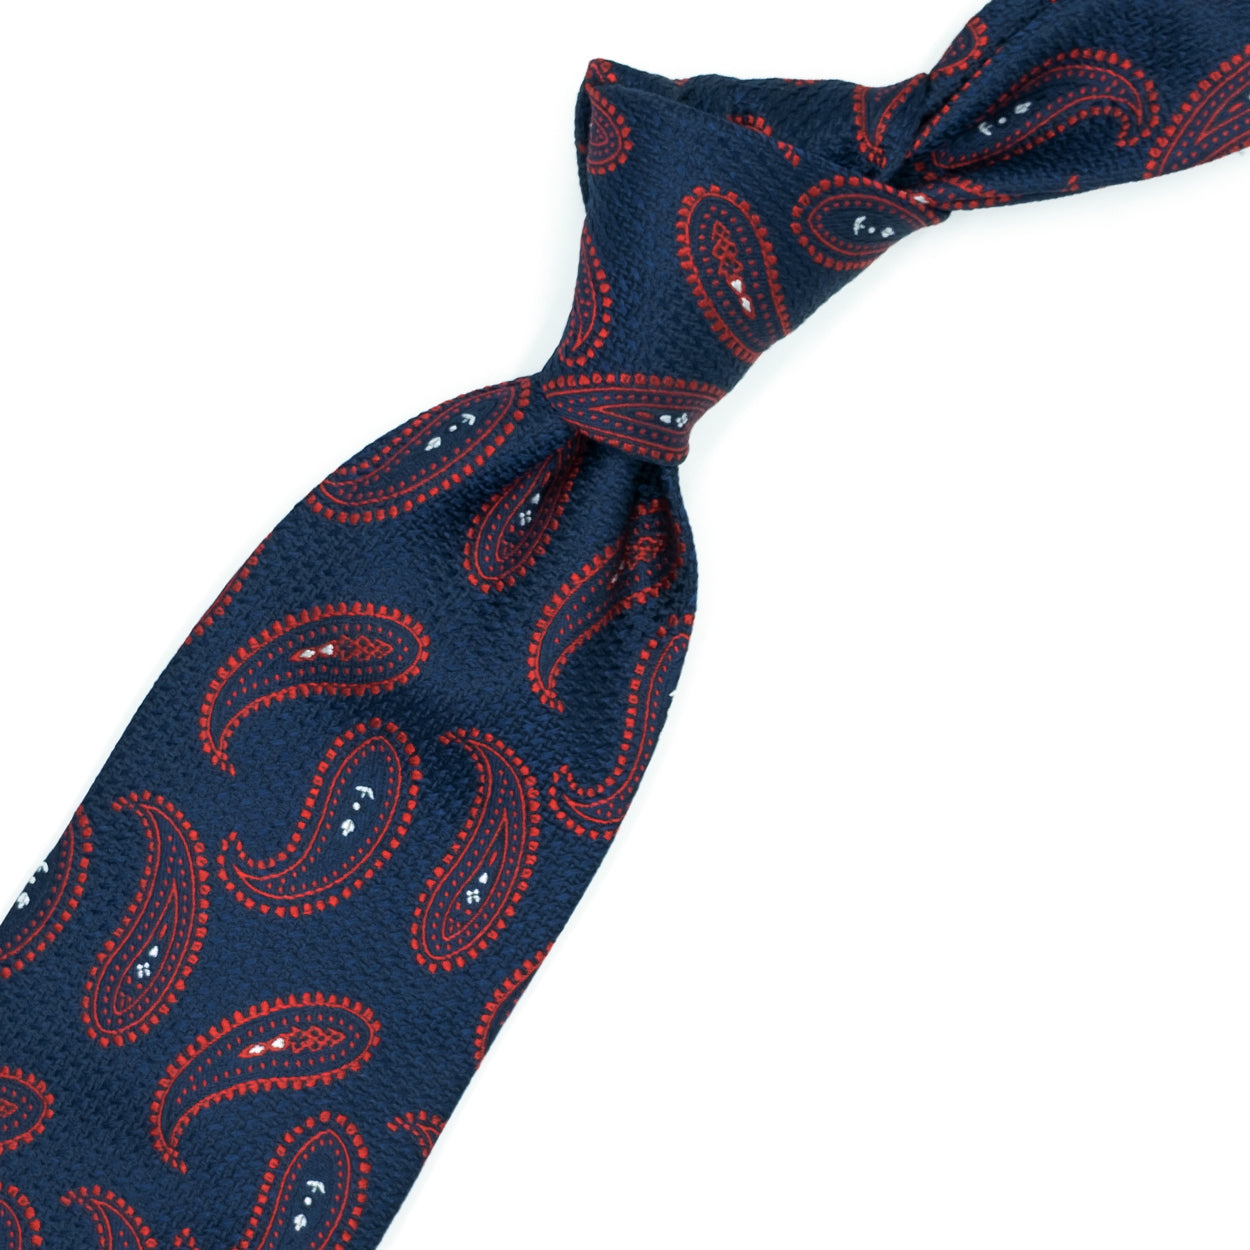 Blue tie with red paisleys